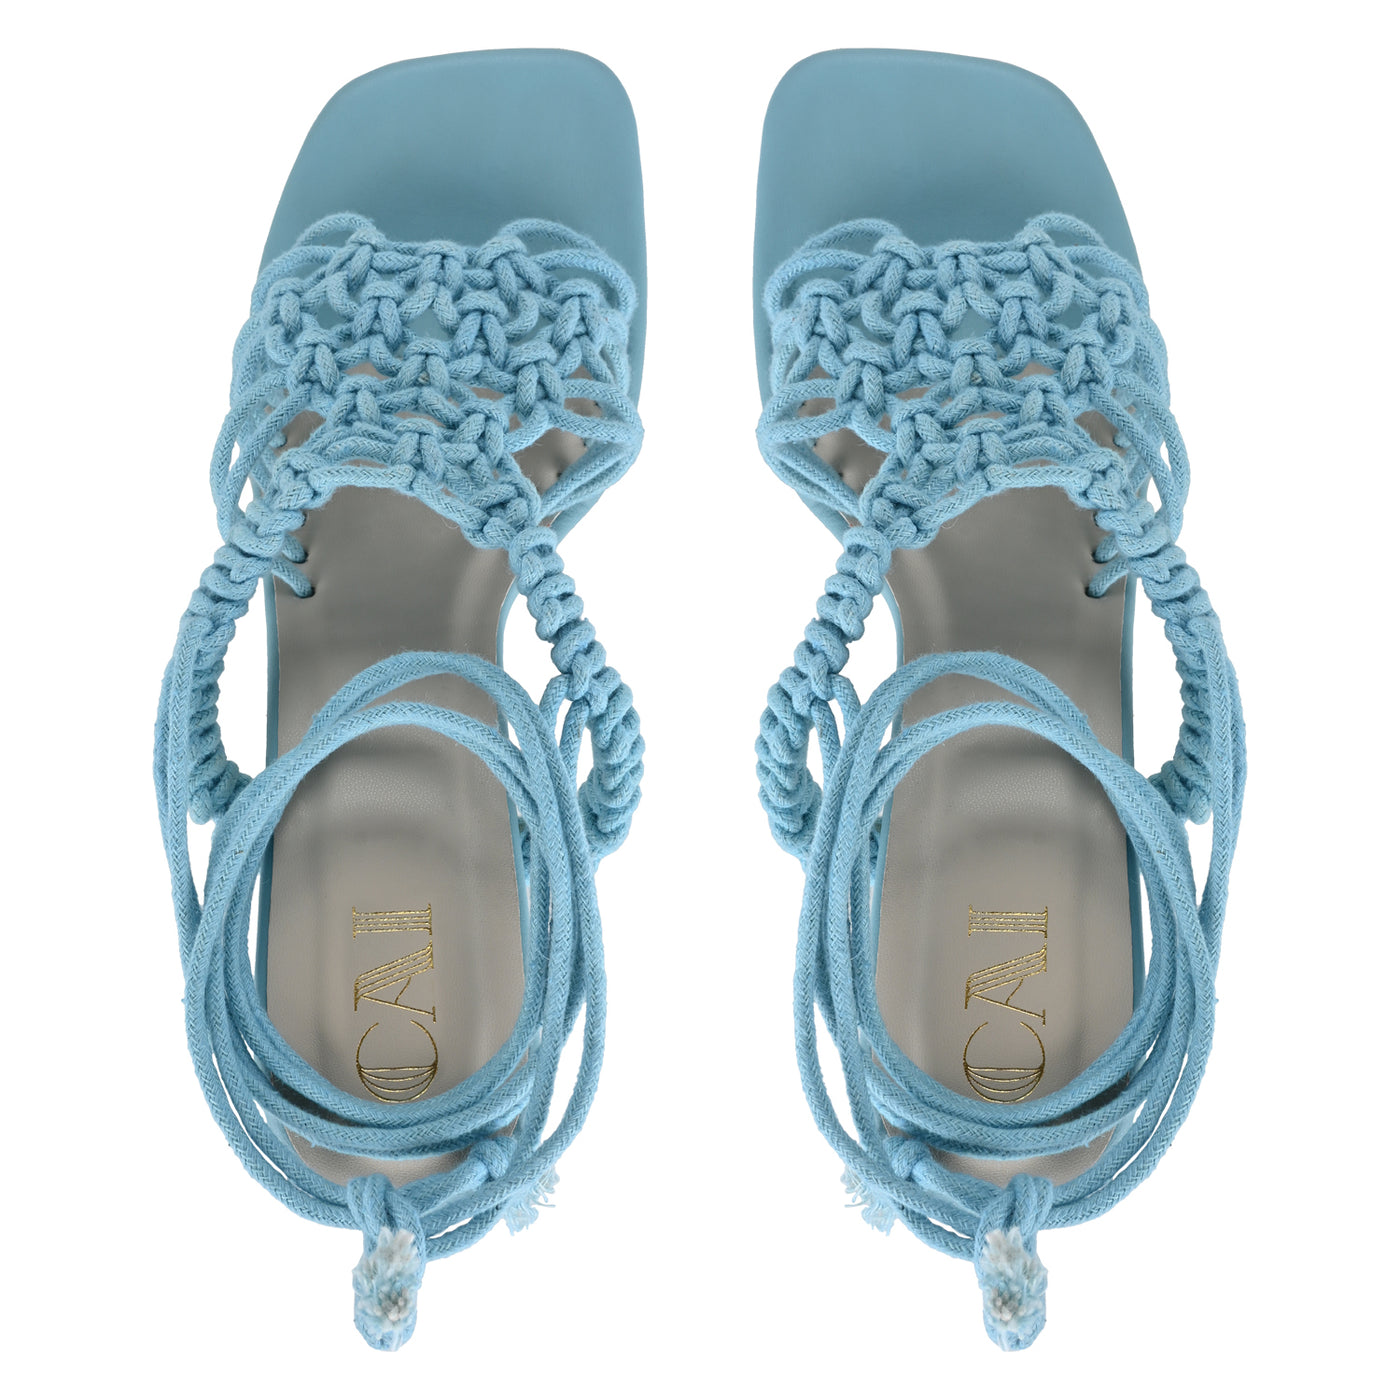 Buy Blue Knotted Tie-Up Heels at The Cai Store